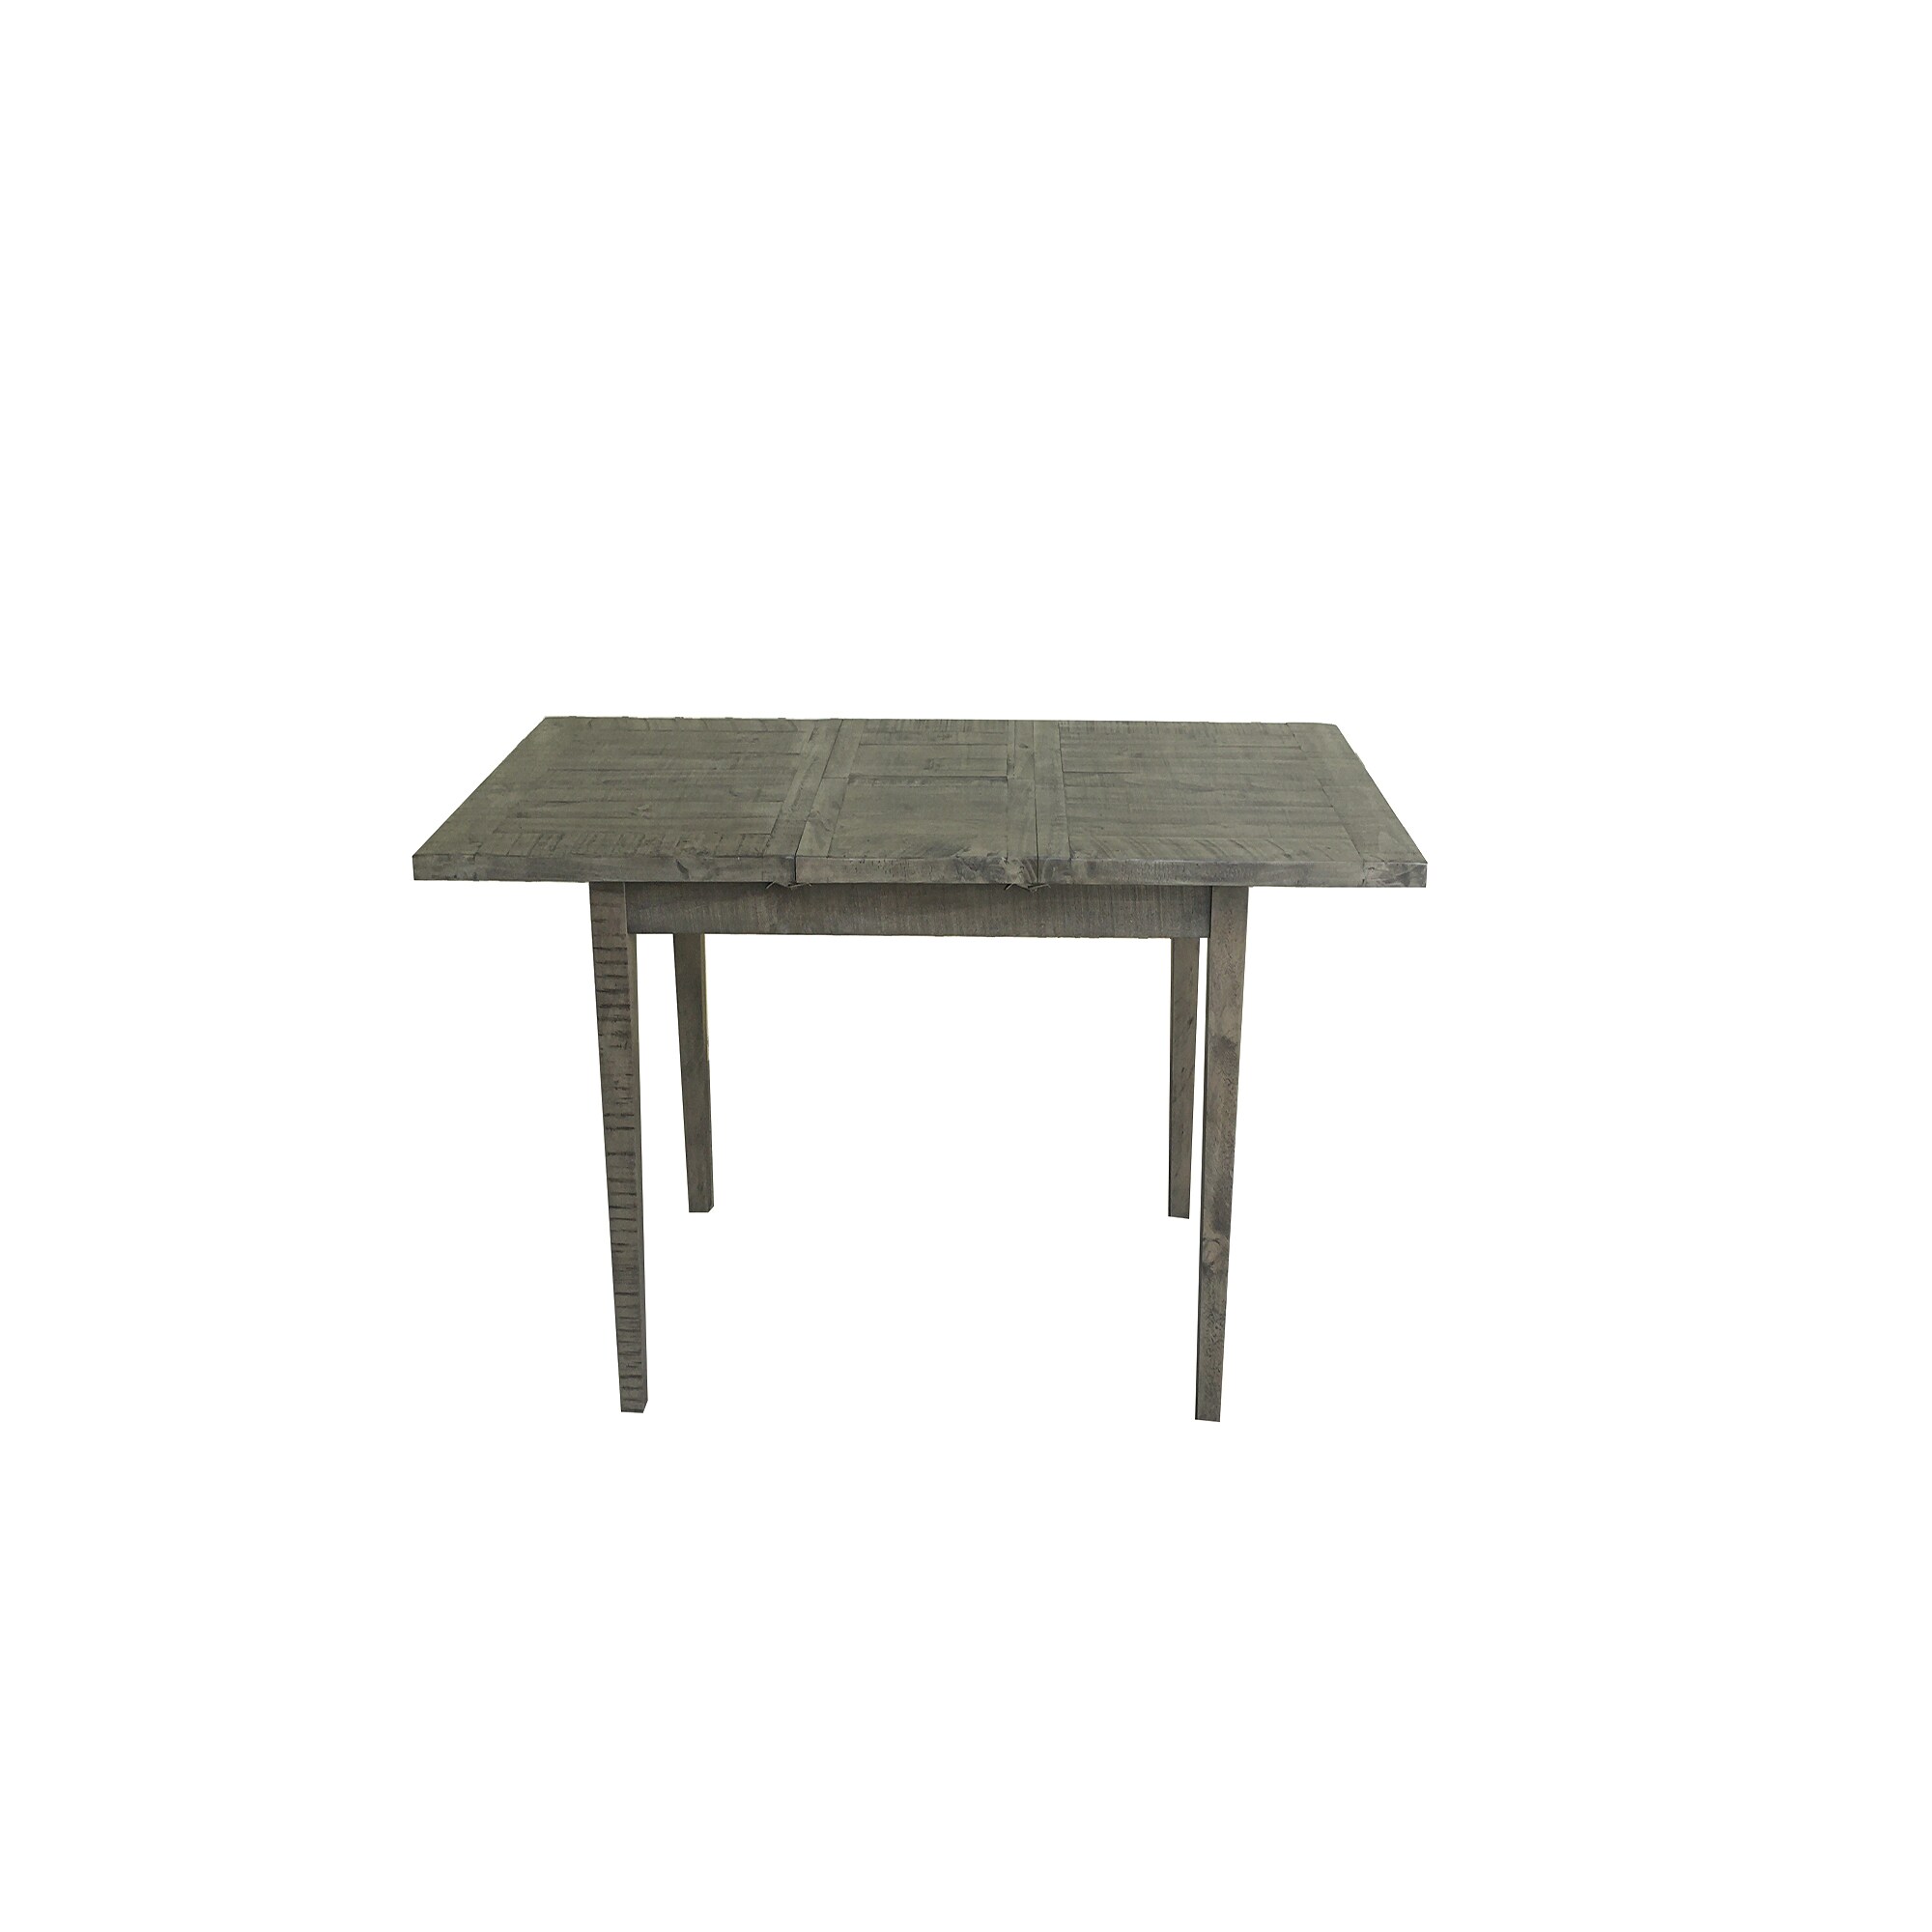 NEW MODERN rectangular dining table in reclaimed wood